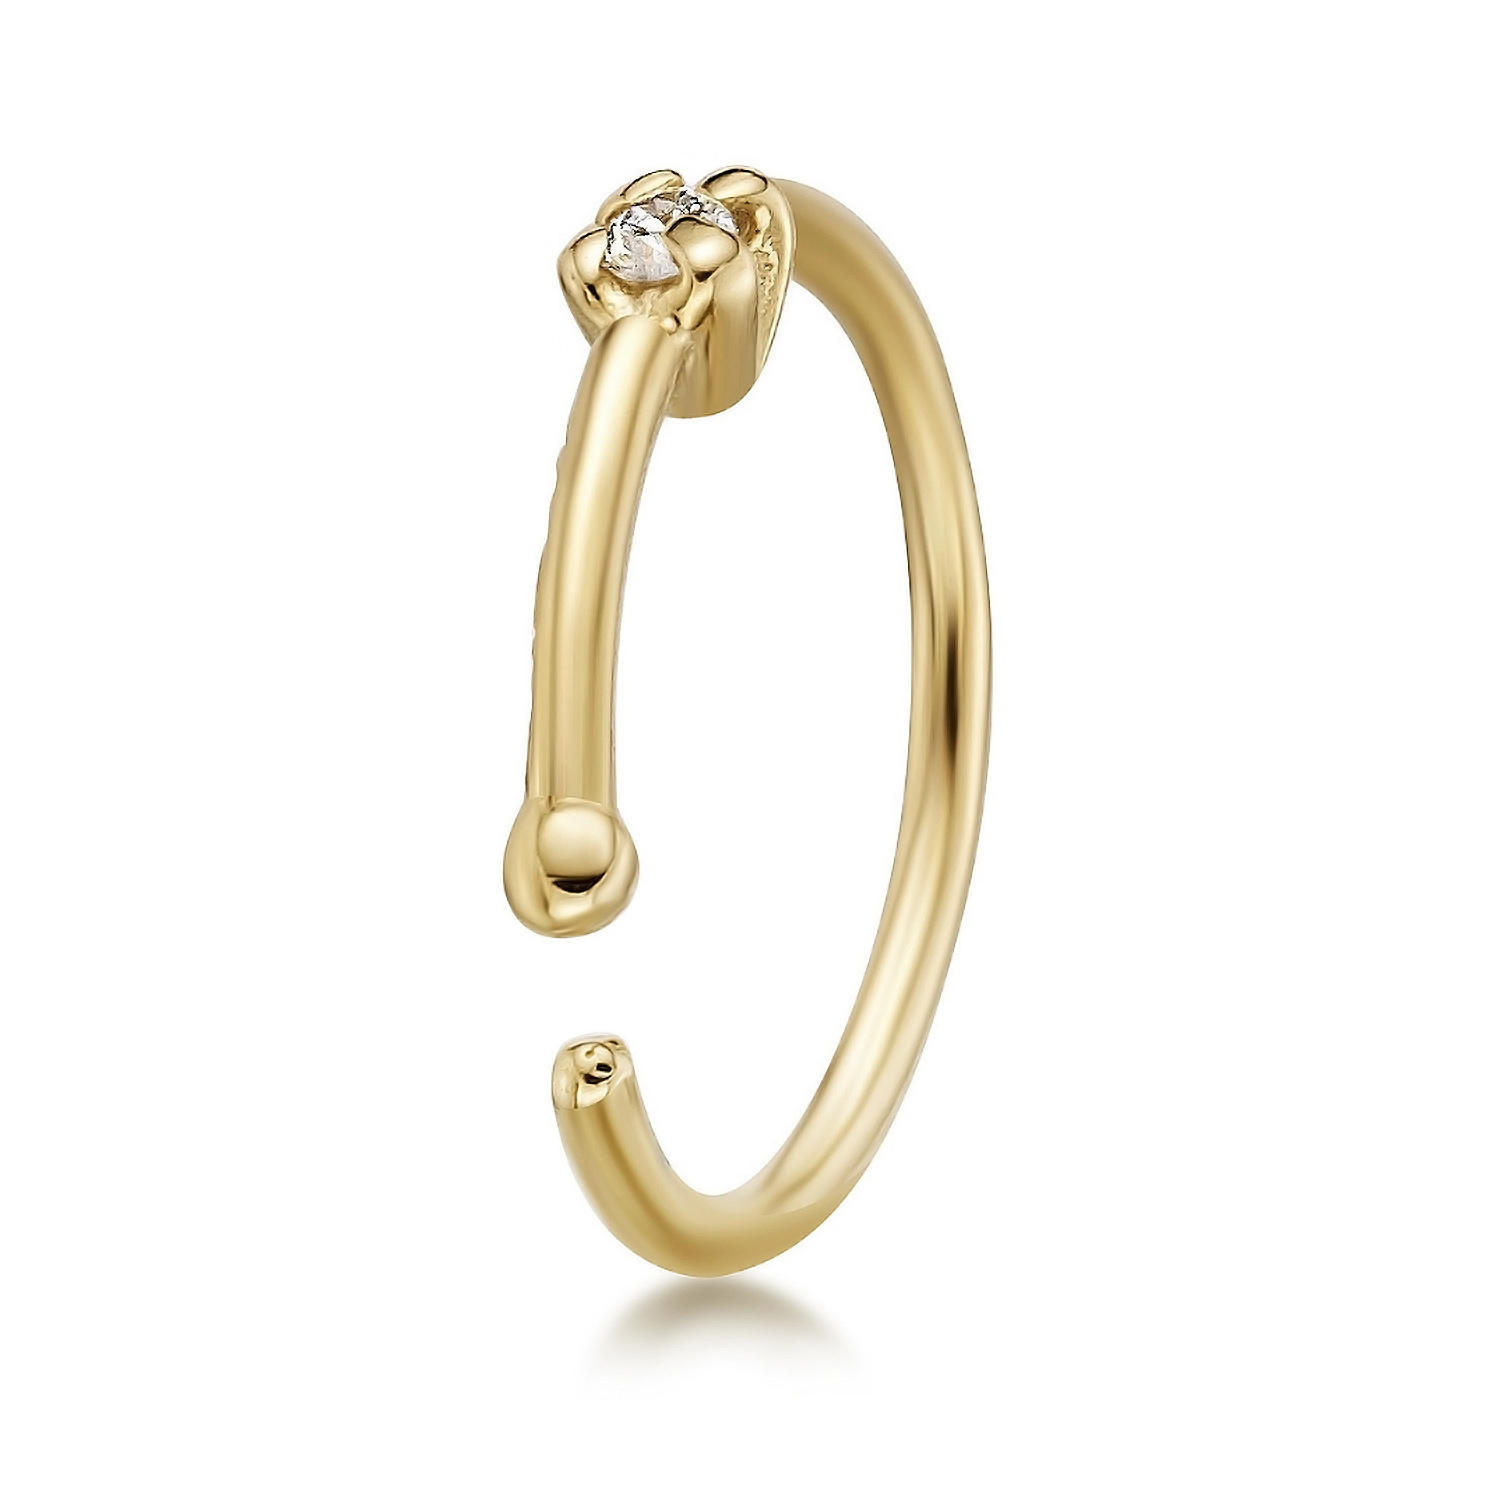 18G Half Hoop Nose Ring 14K Solid Gold Nose Ring – OUFER BODY JEWELRY